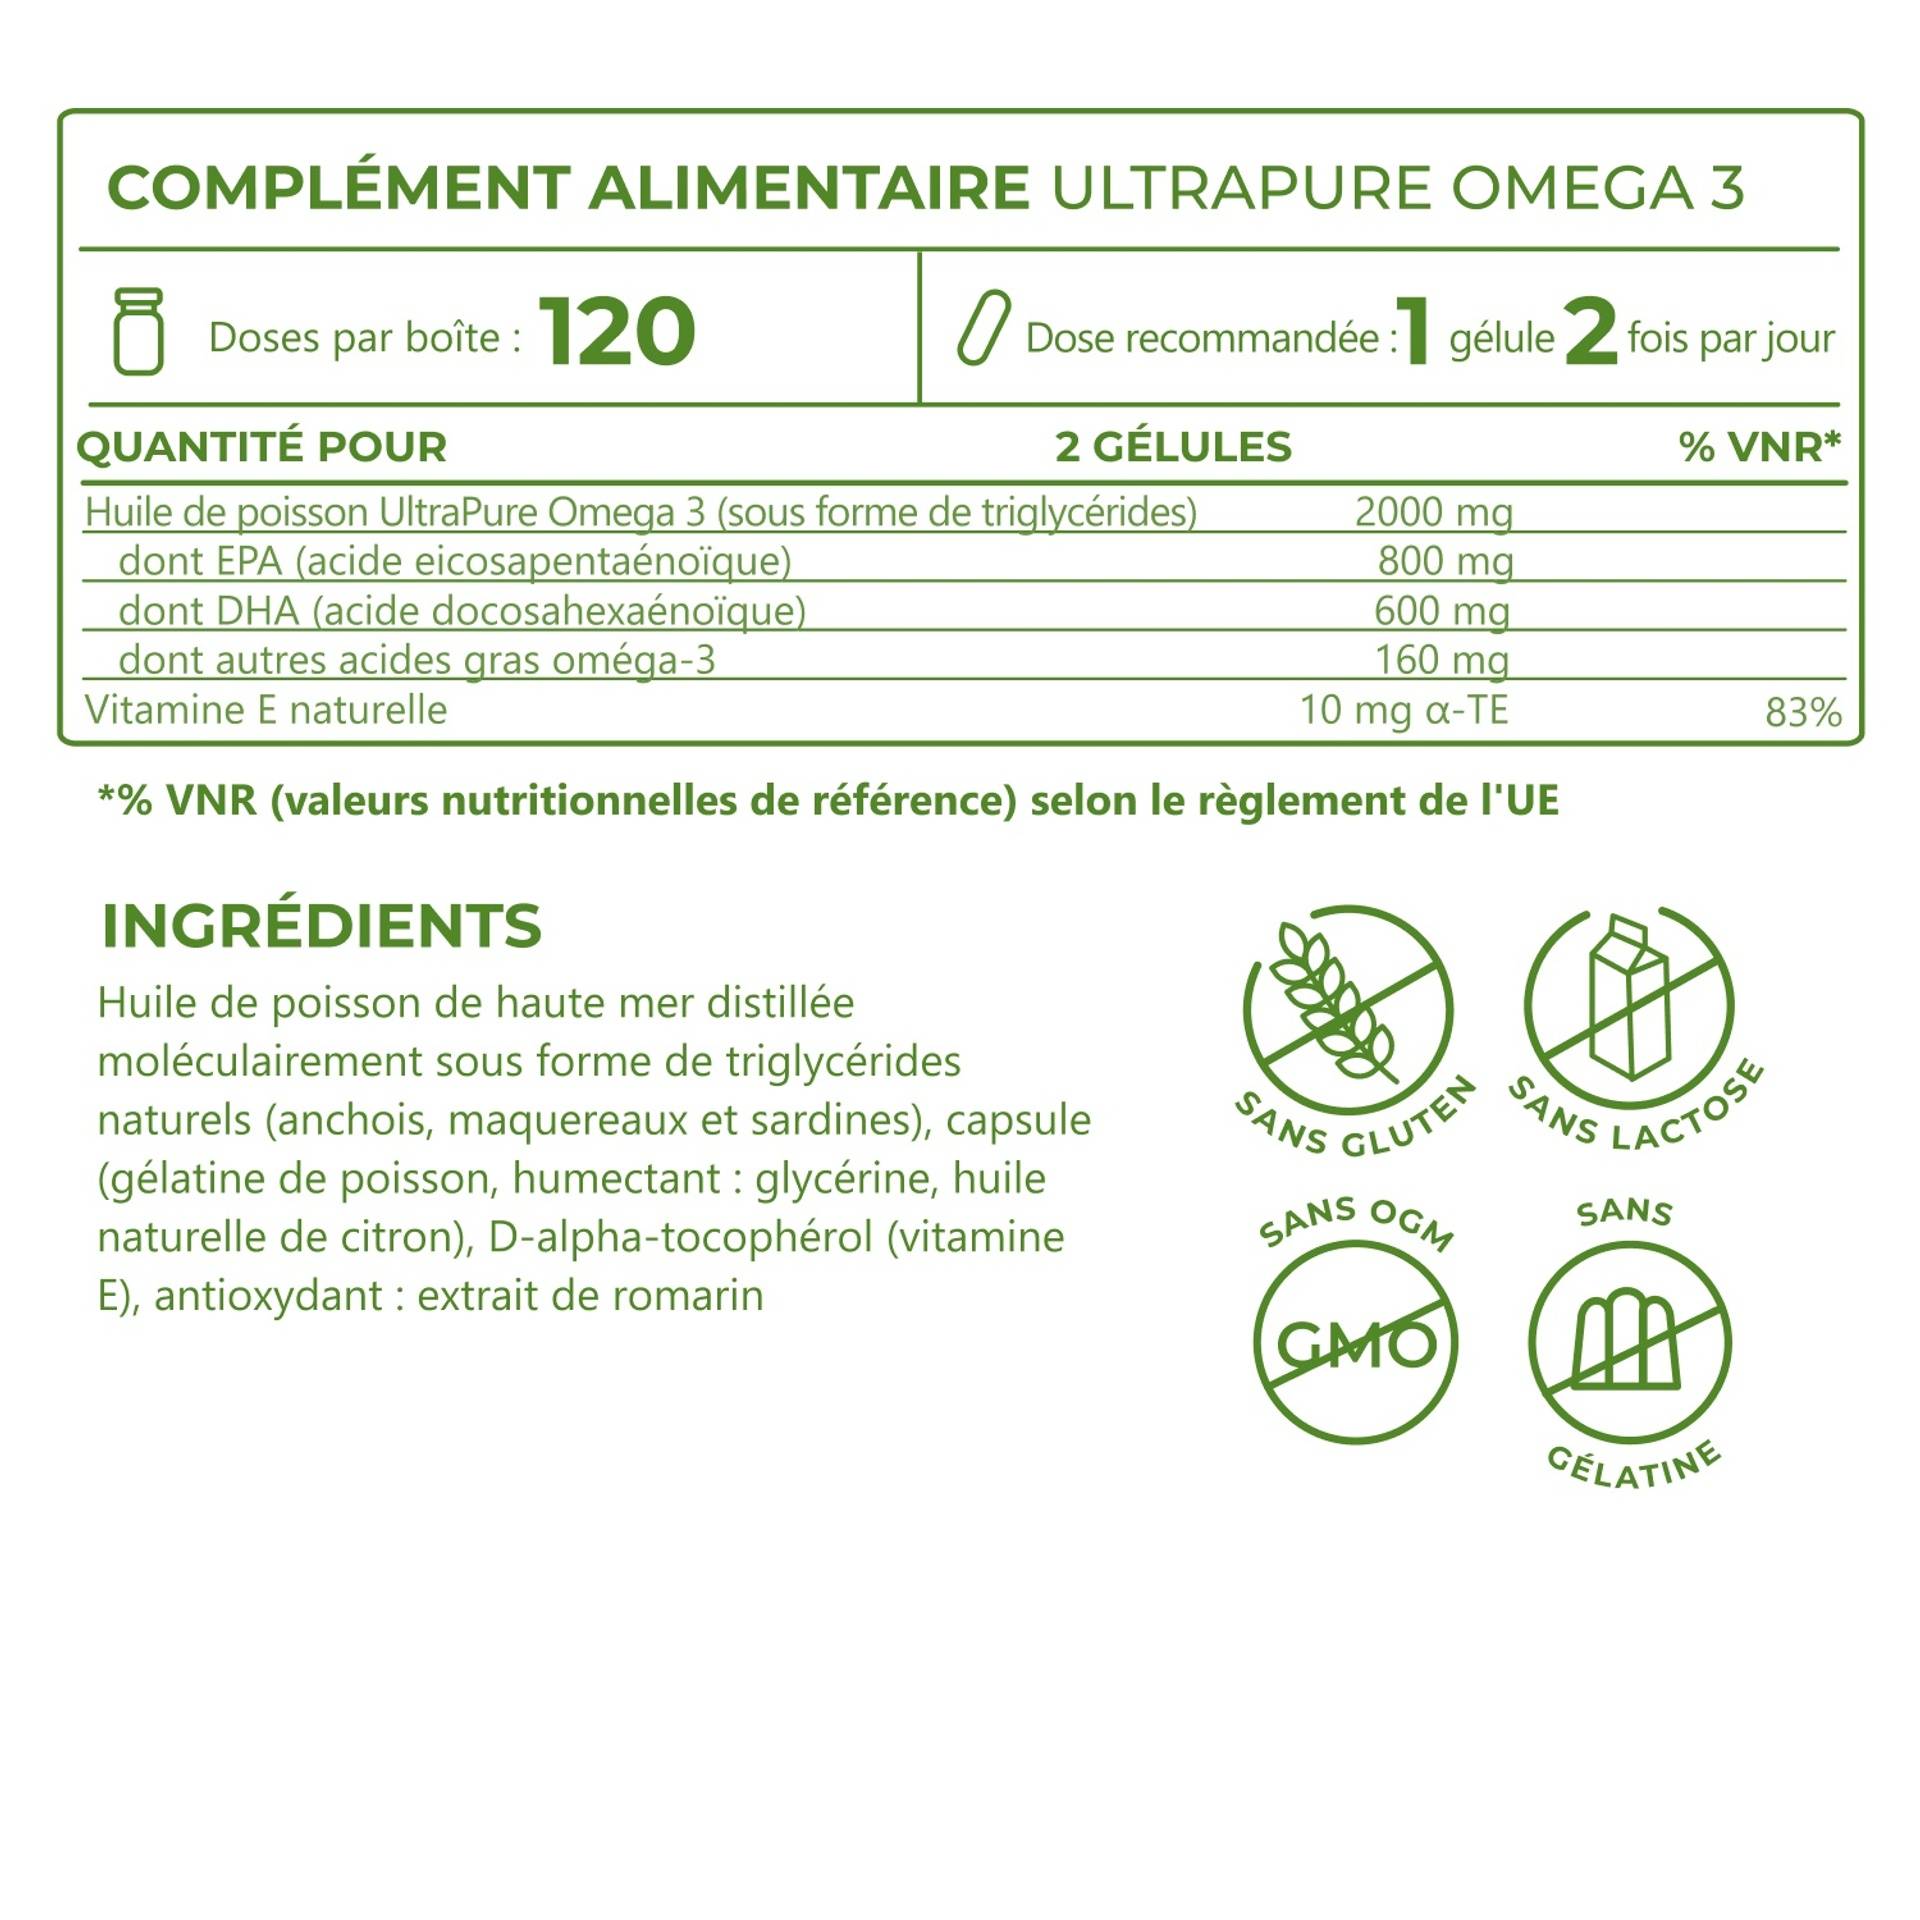 5_Ingredients_Ultrapure Omega 3_6852-04.png